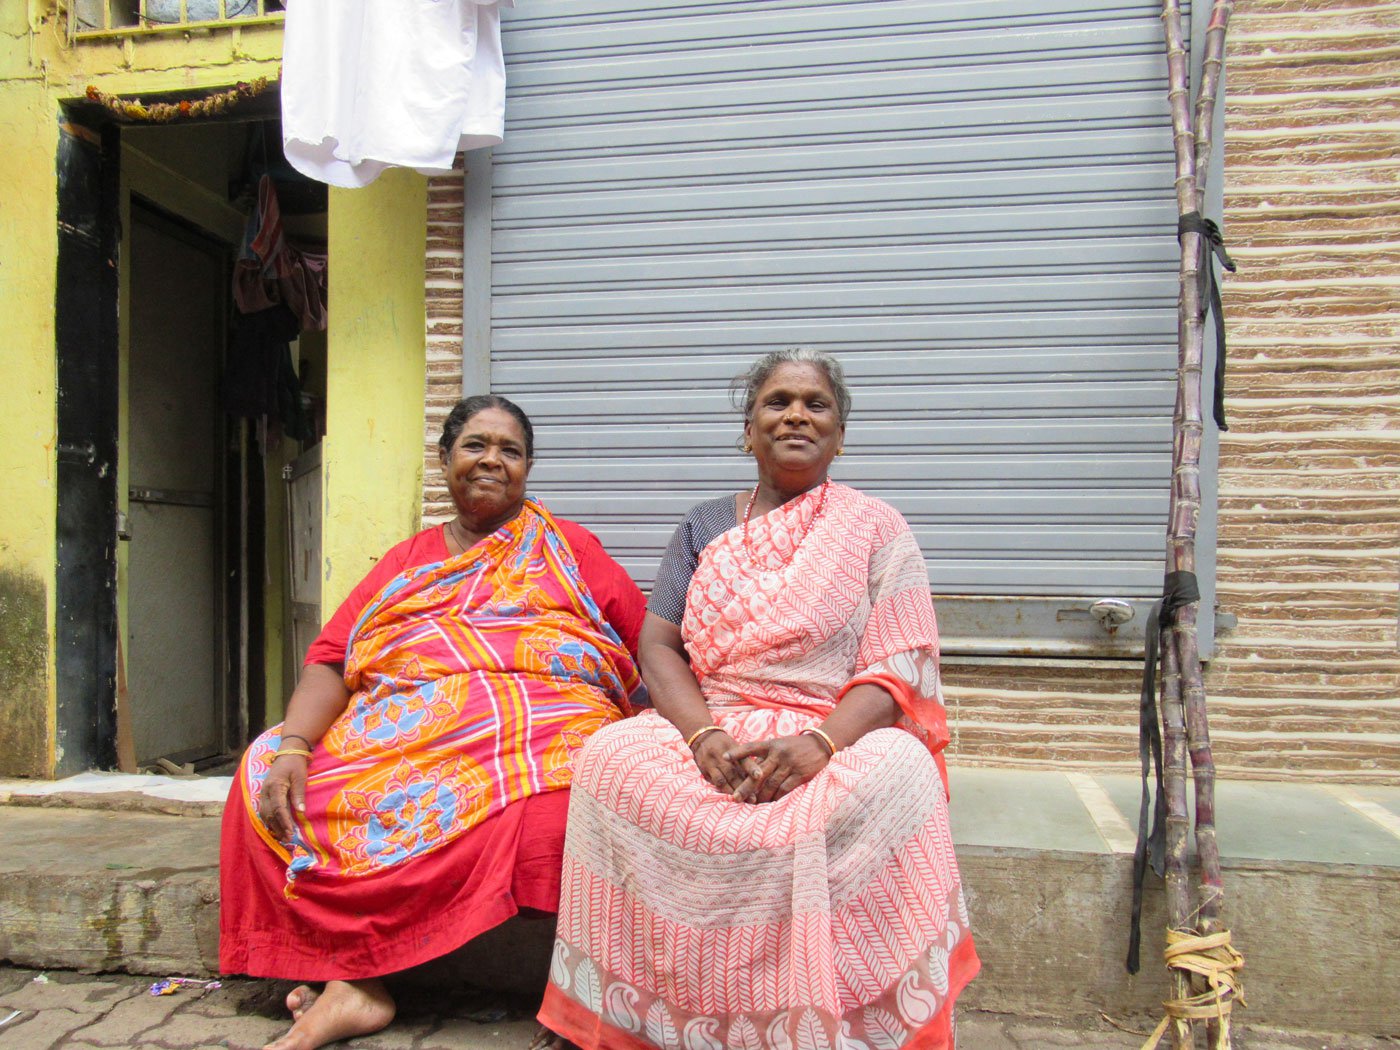 Pushpaveni and Vasanti, who have spent half a century in Mumbai’s Dharavi, go down memory lane – and speak of arriving there as brides, a world measured in paise, of contentment in this extraordinary locality